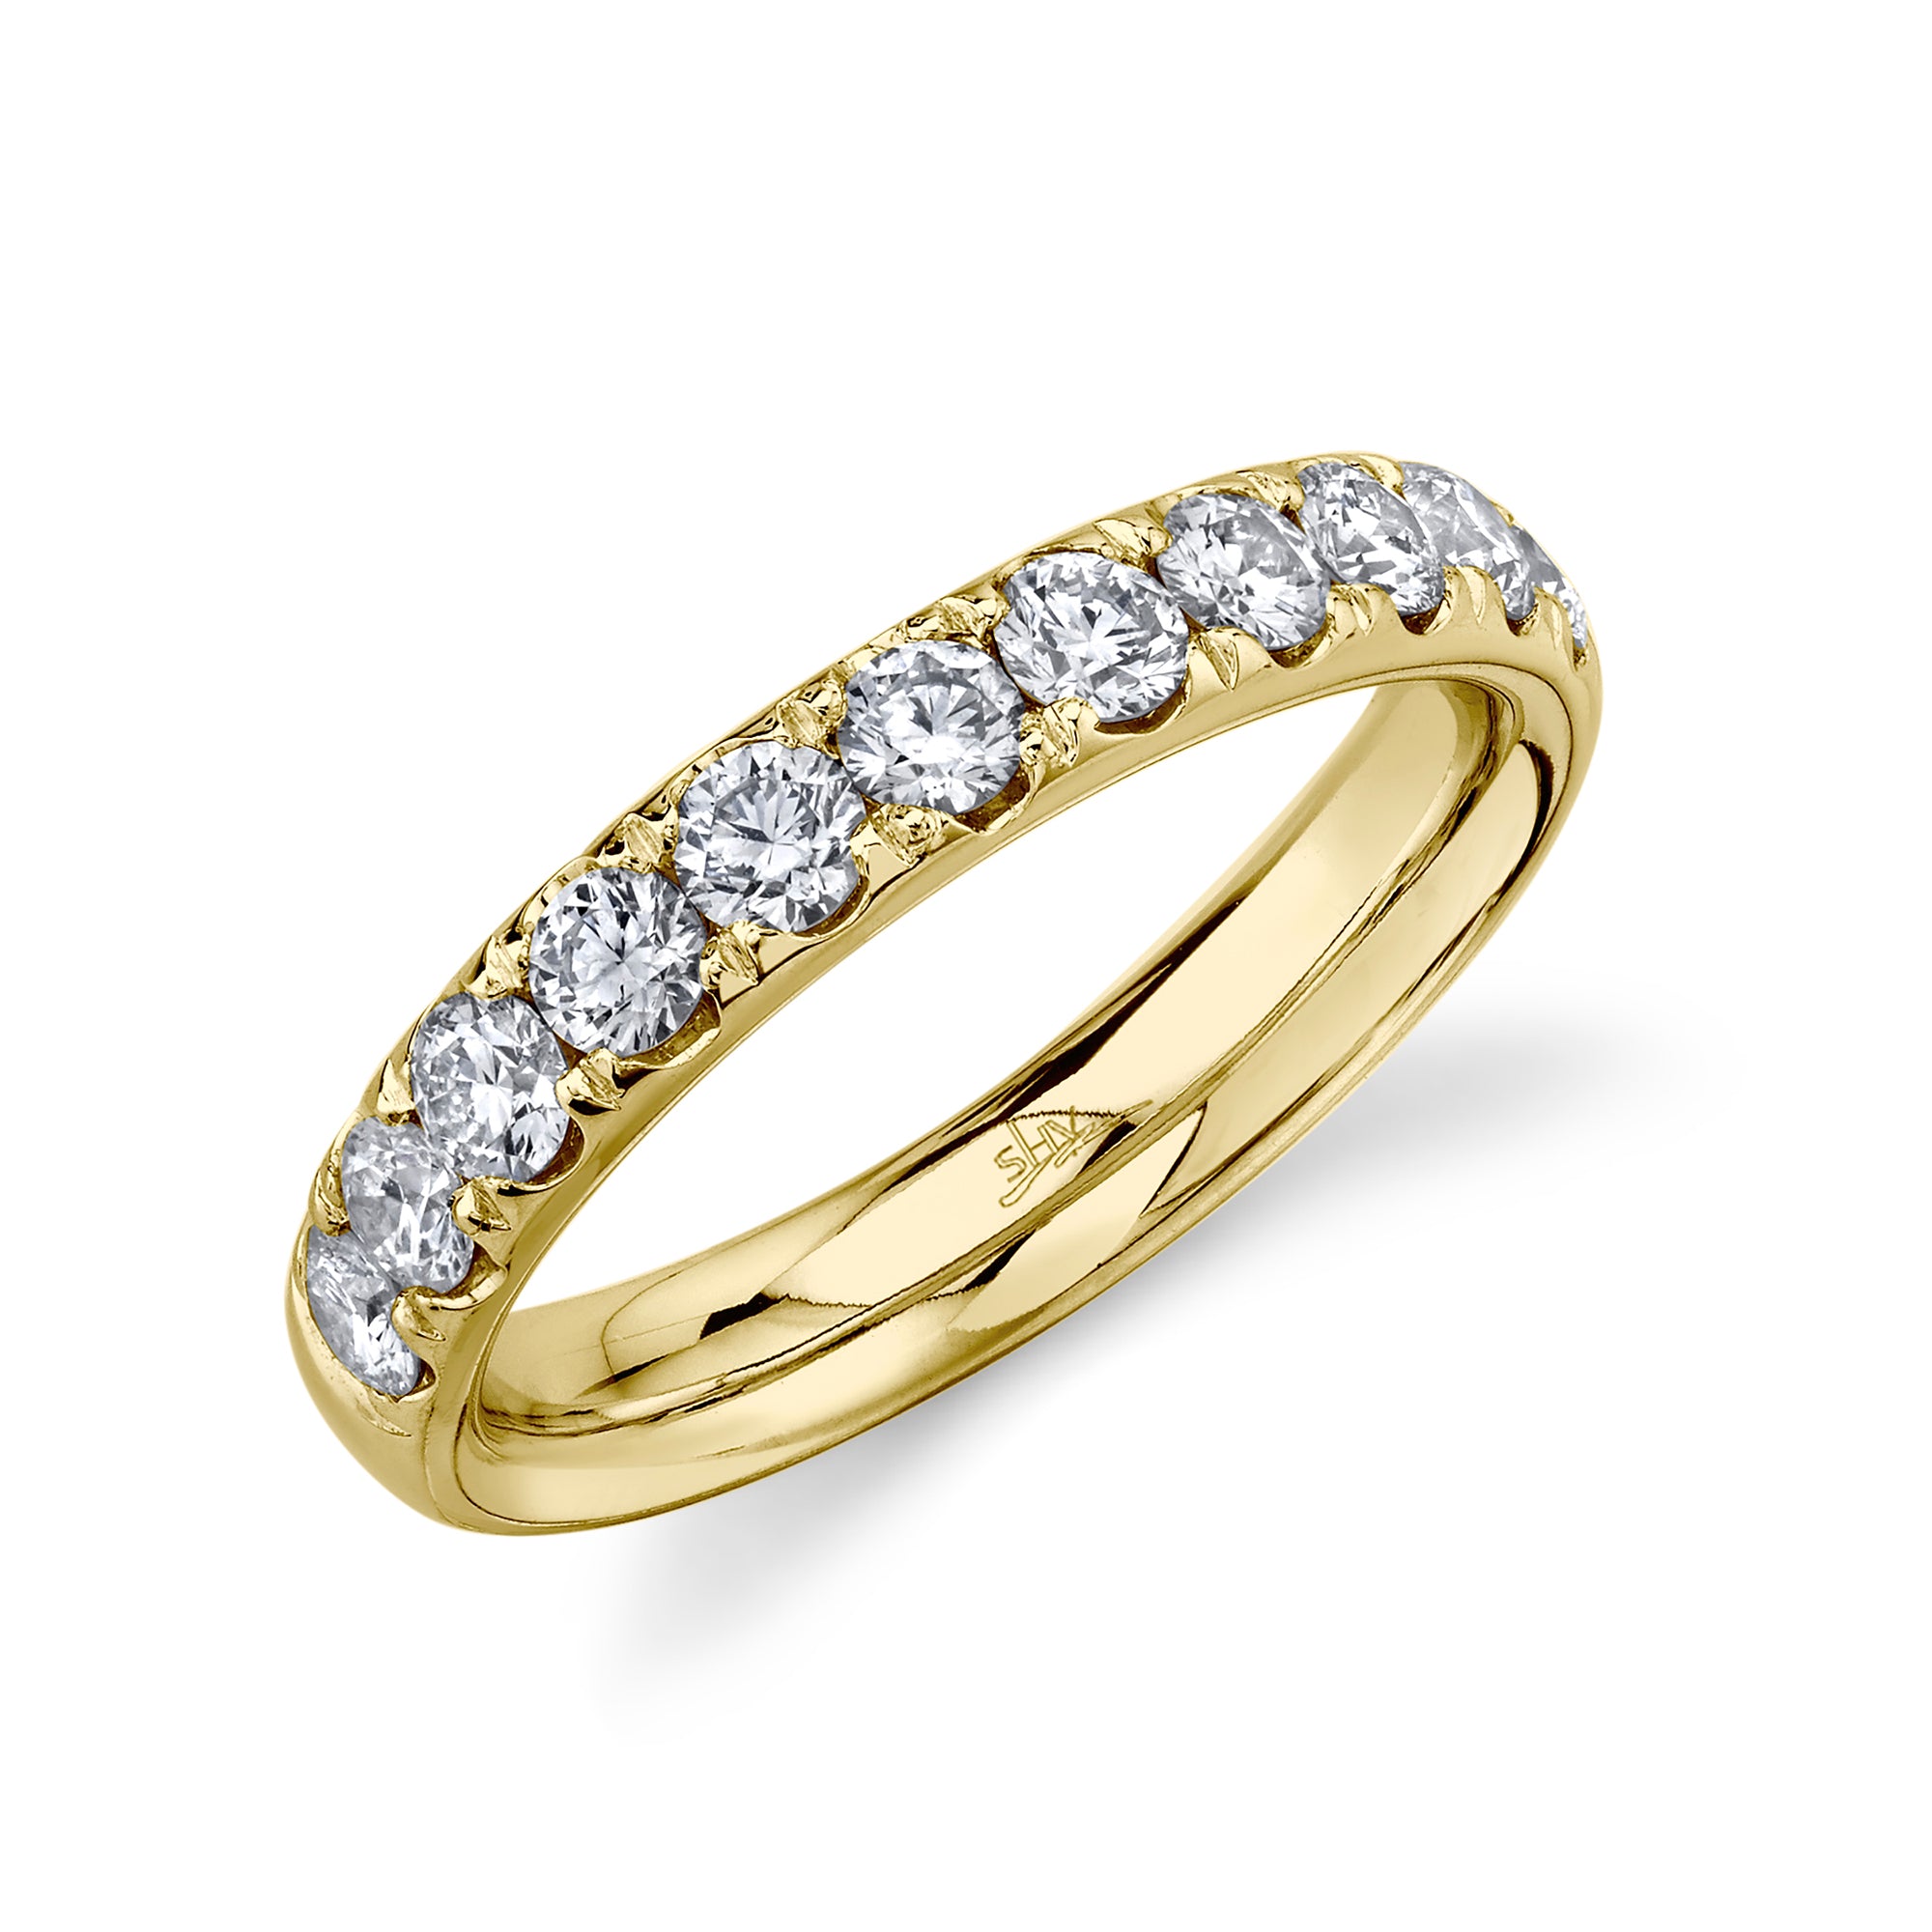 14 kt yellow gold classic wedding bands - sc22005397